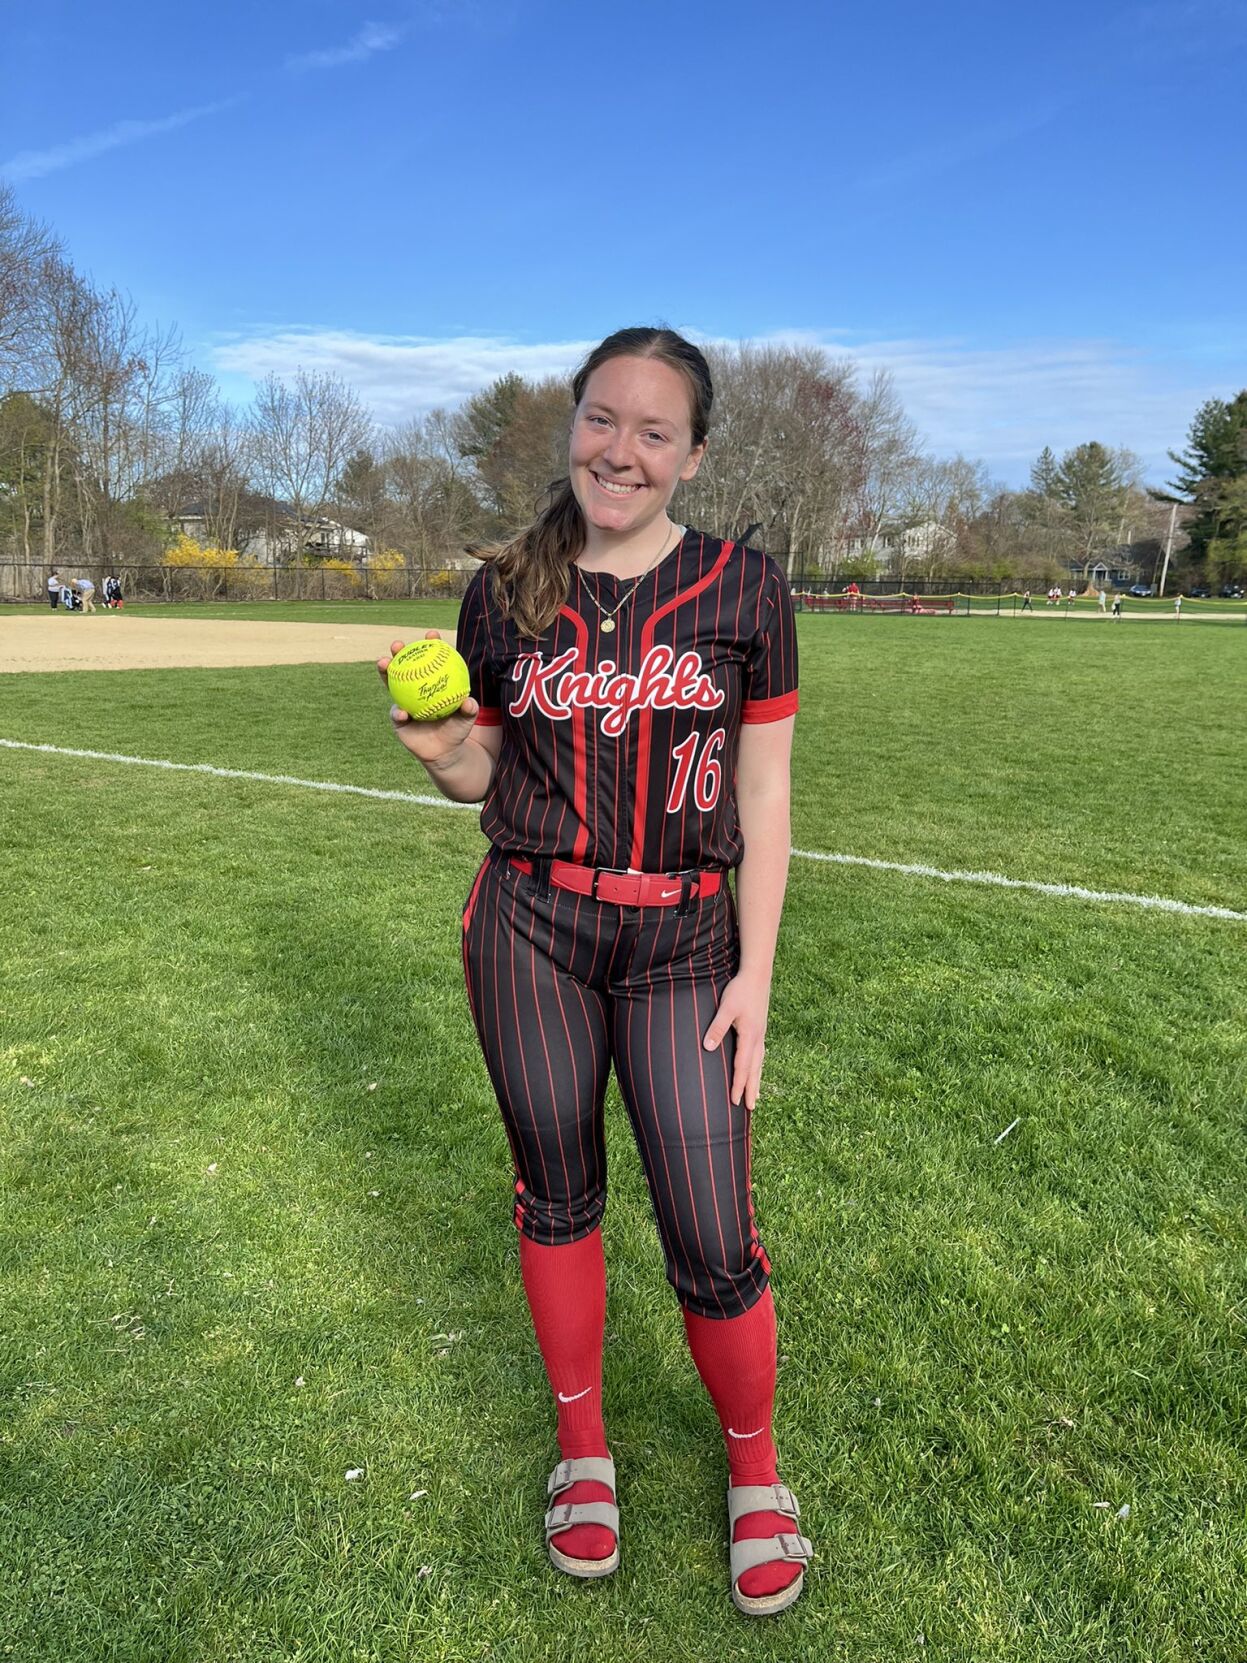 North Andover’s Gaffny reaches 400-strikeout plateau in win over Lowell